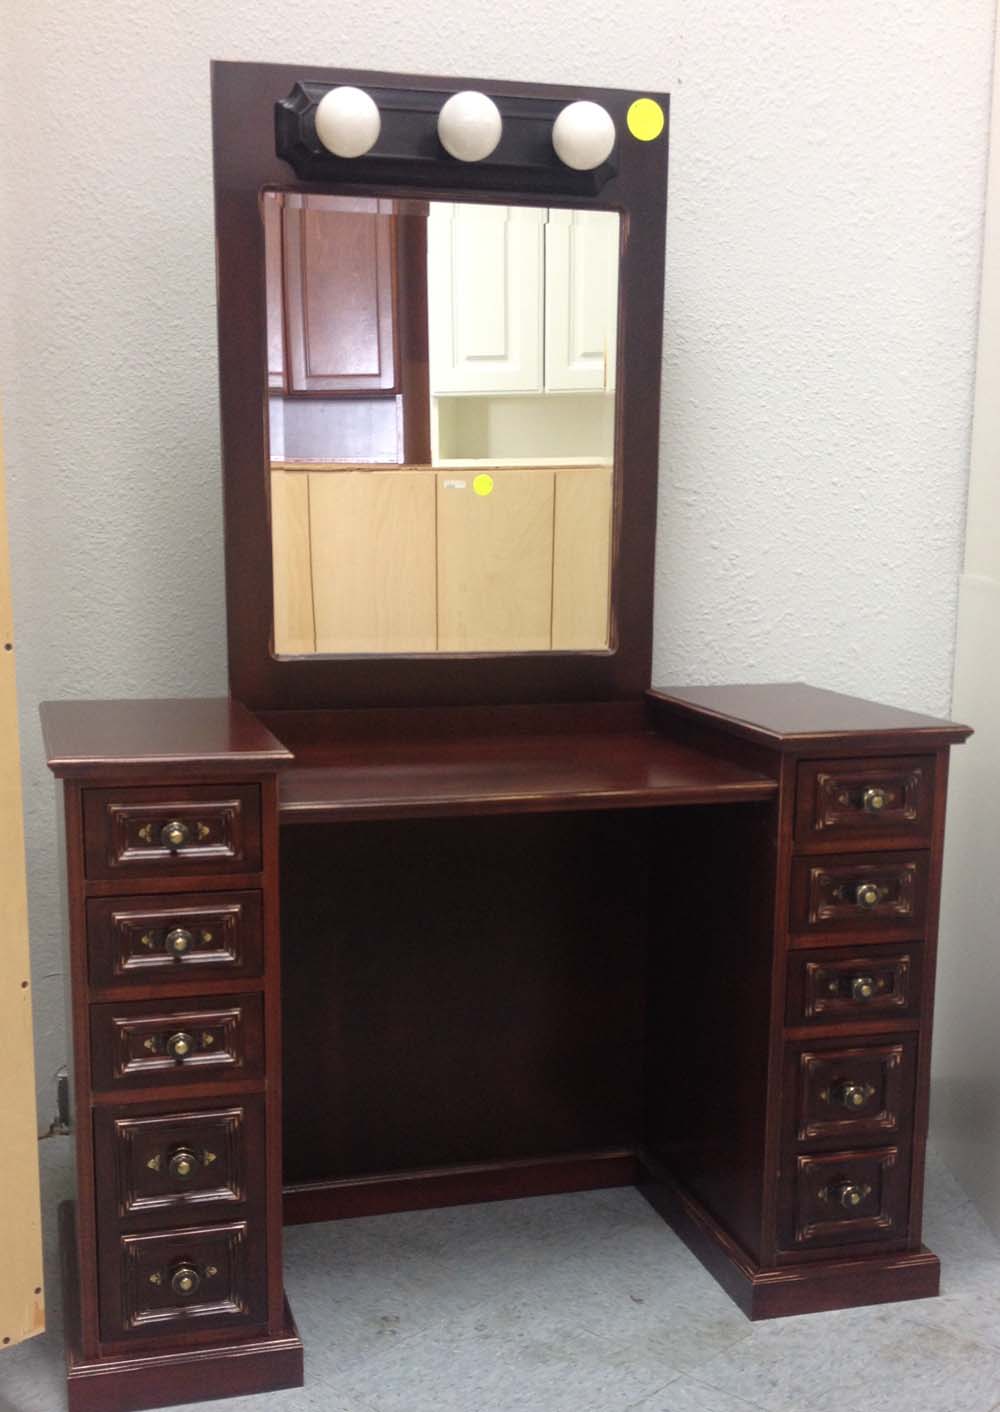 Mahogany MakeUp Desk with Lighted Mirror